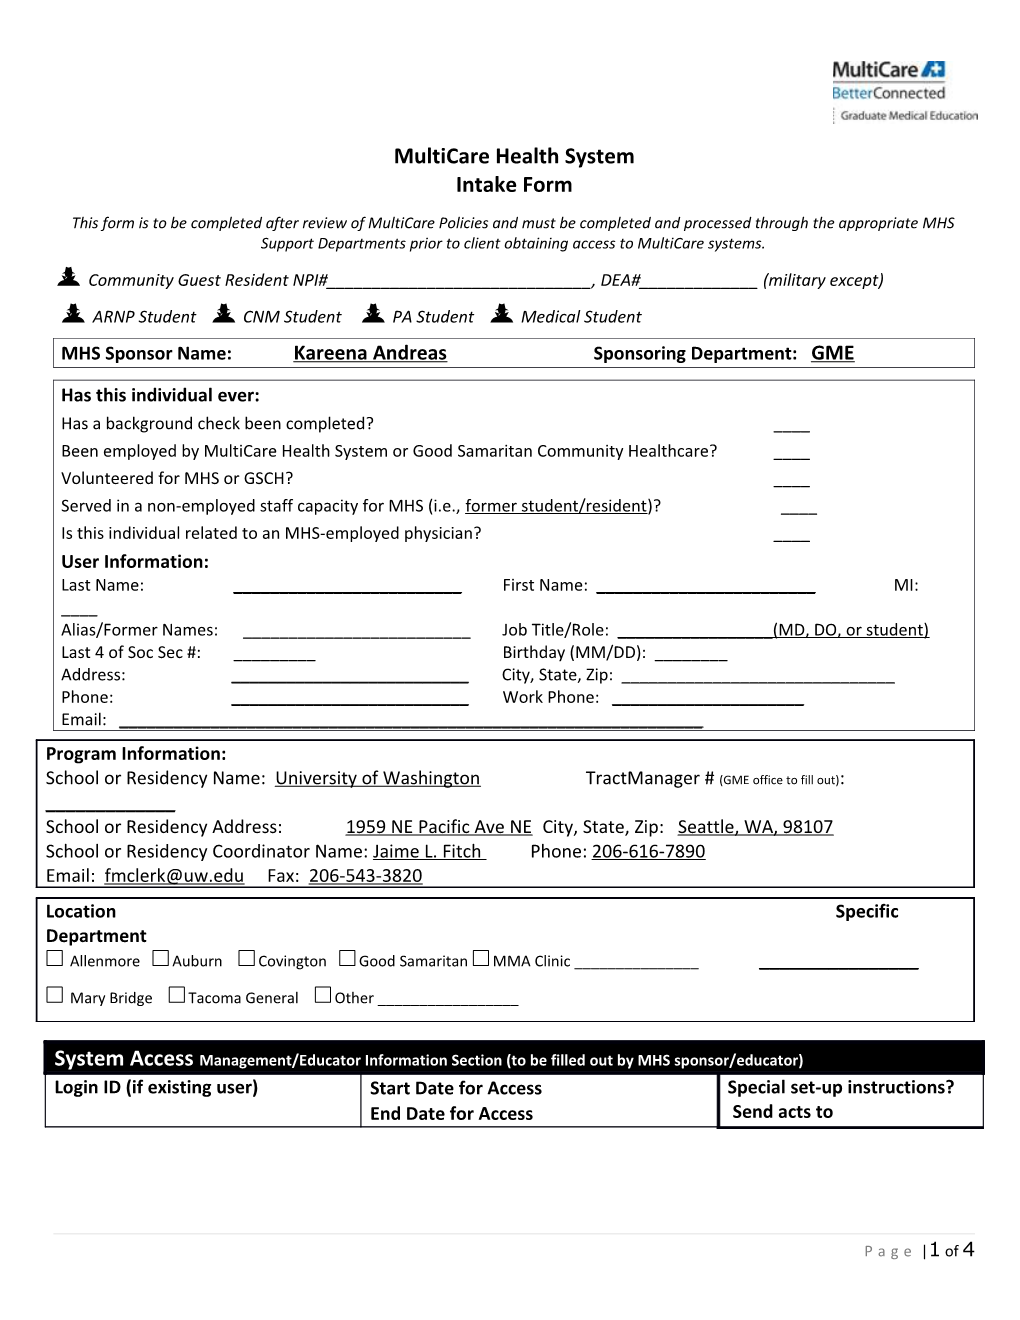 MHS Intake Form (Intended for Info Gathering to Input Into IS Service Portal Request)